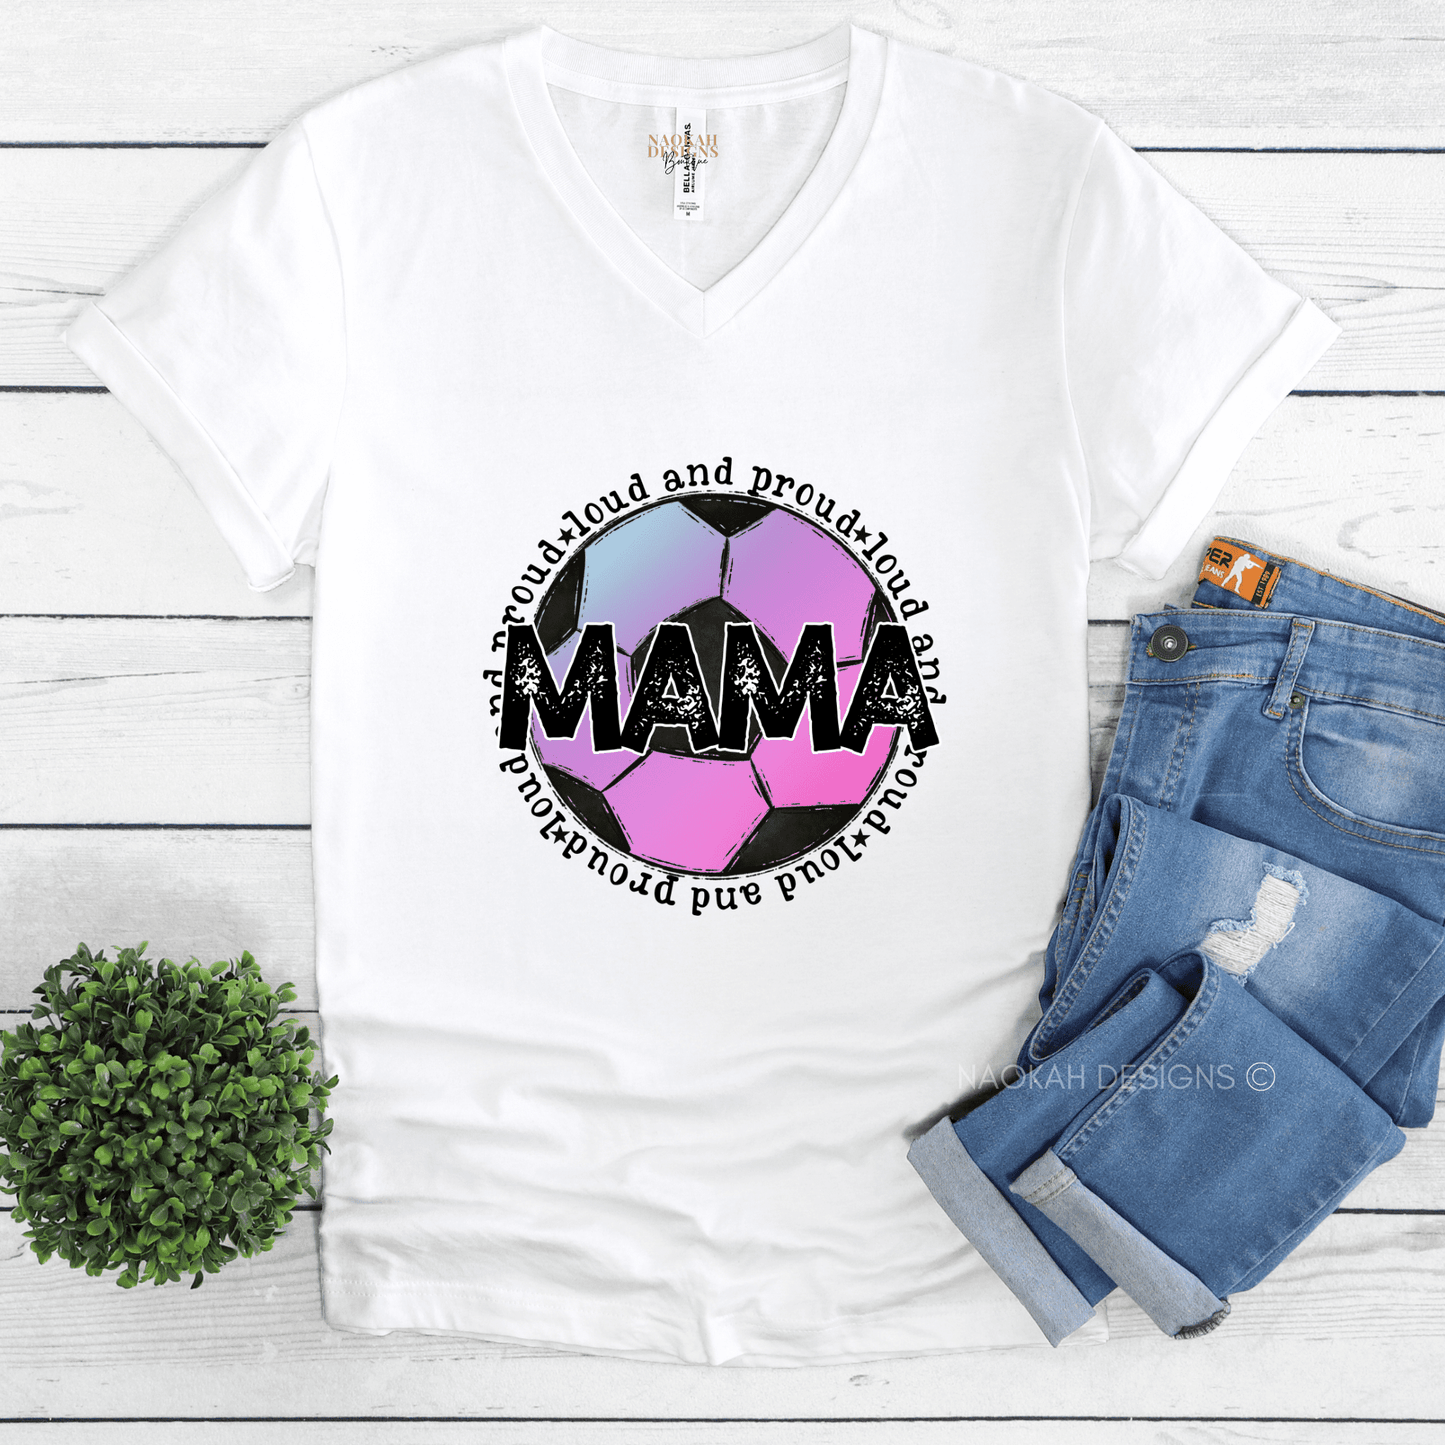 Loud and Proud Soccer Mom Shirt, Soccer Mom Shirt, Soccer Mama Shirt, Kick Some Grass Soccer Shirt, Game Day Shirt, Soccer Coffee Tee